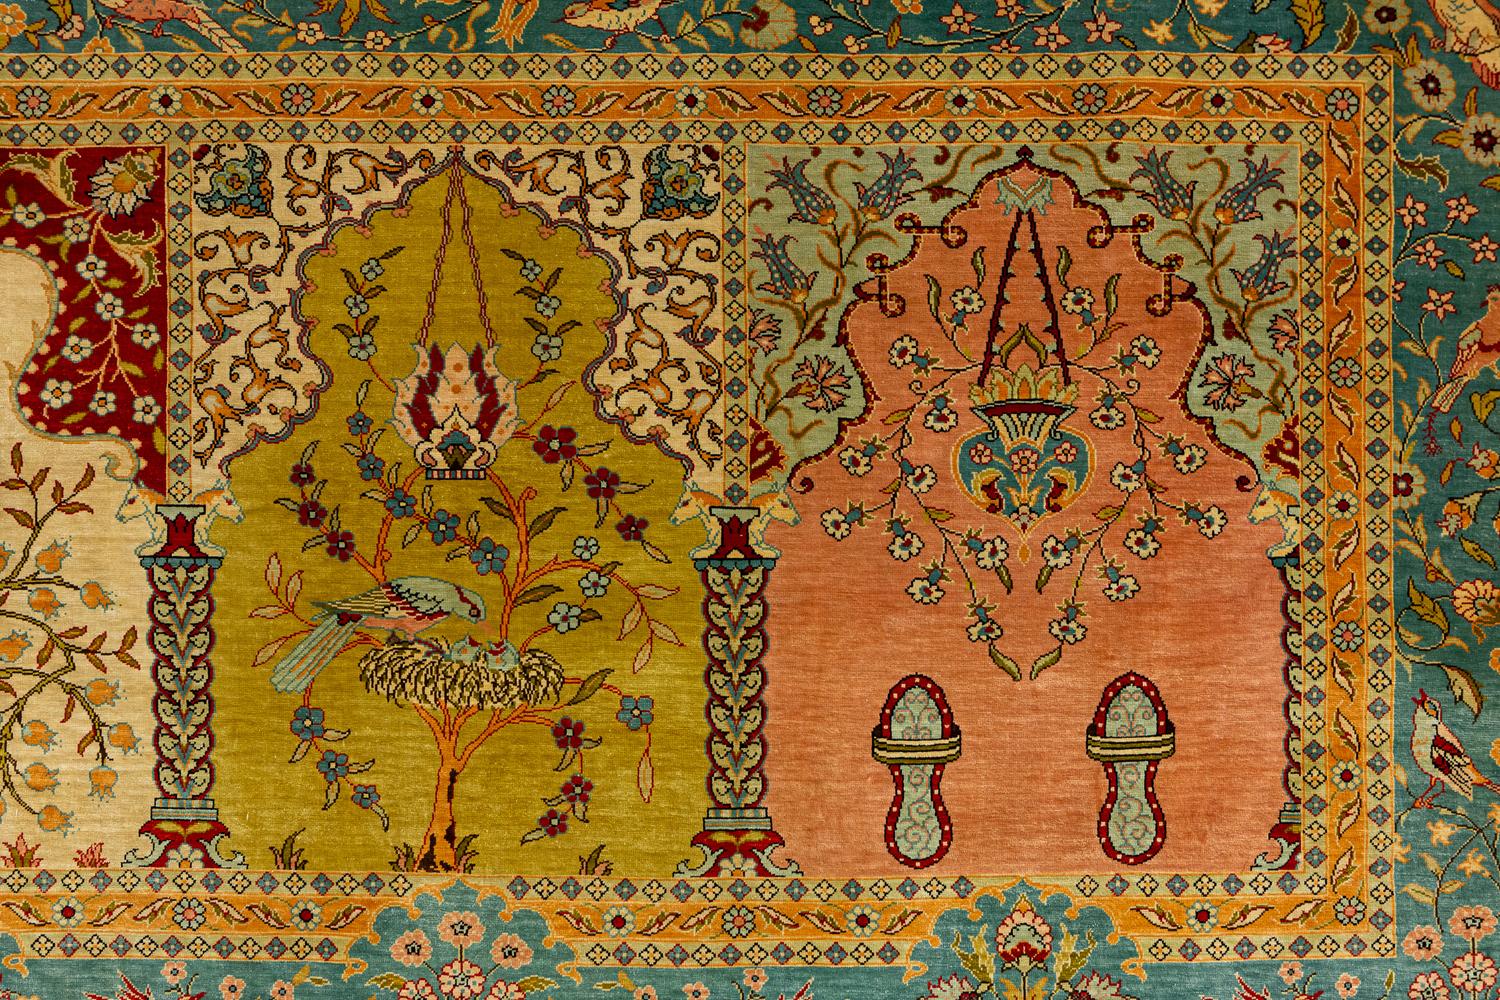 This is a semi-antique Hereke rug woven in Turkey during the mid-20th century circa 1950 - 1970's and measures 185 x 84 CM in size. This example has a unique “saf” design which is repeating panels containing mihrabs that are used for prayers. Each